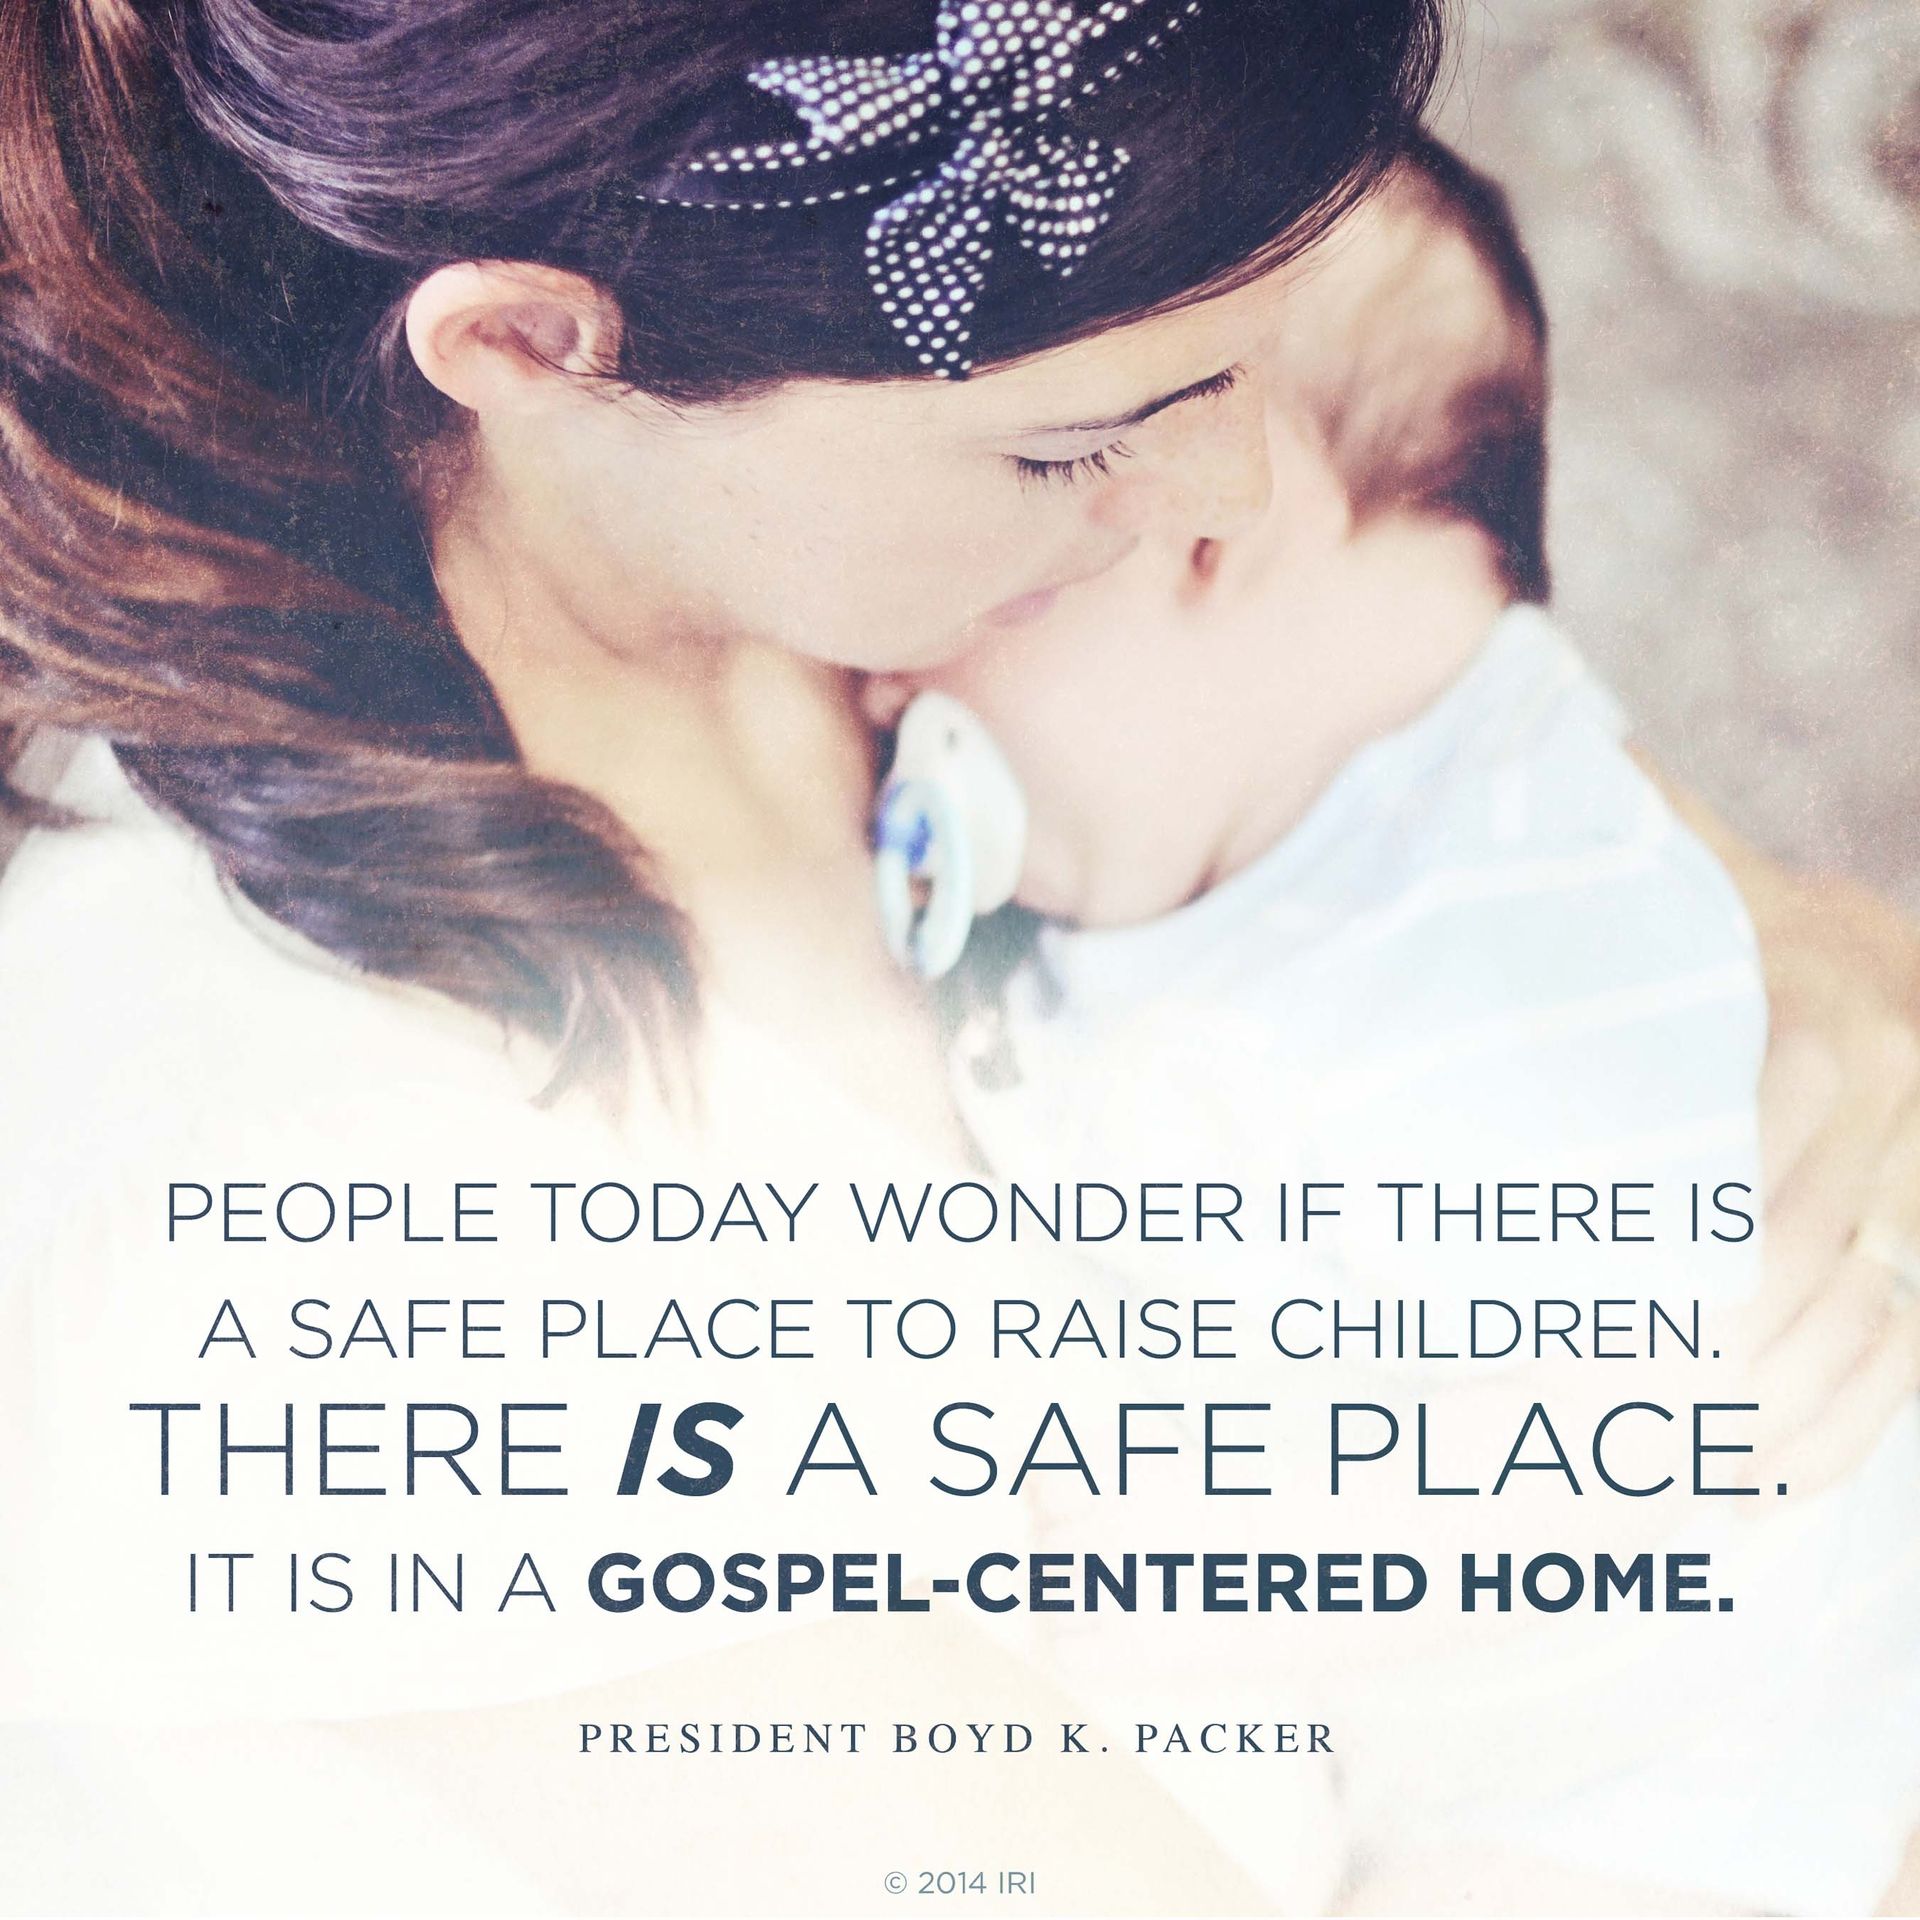 “People today wonder if there is a safe place to raise children. There is a safe place. It is in a gospel-centered home.”—President Boyd K. Packer, “The Key to Spiritual Protection”